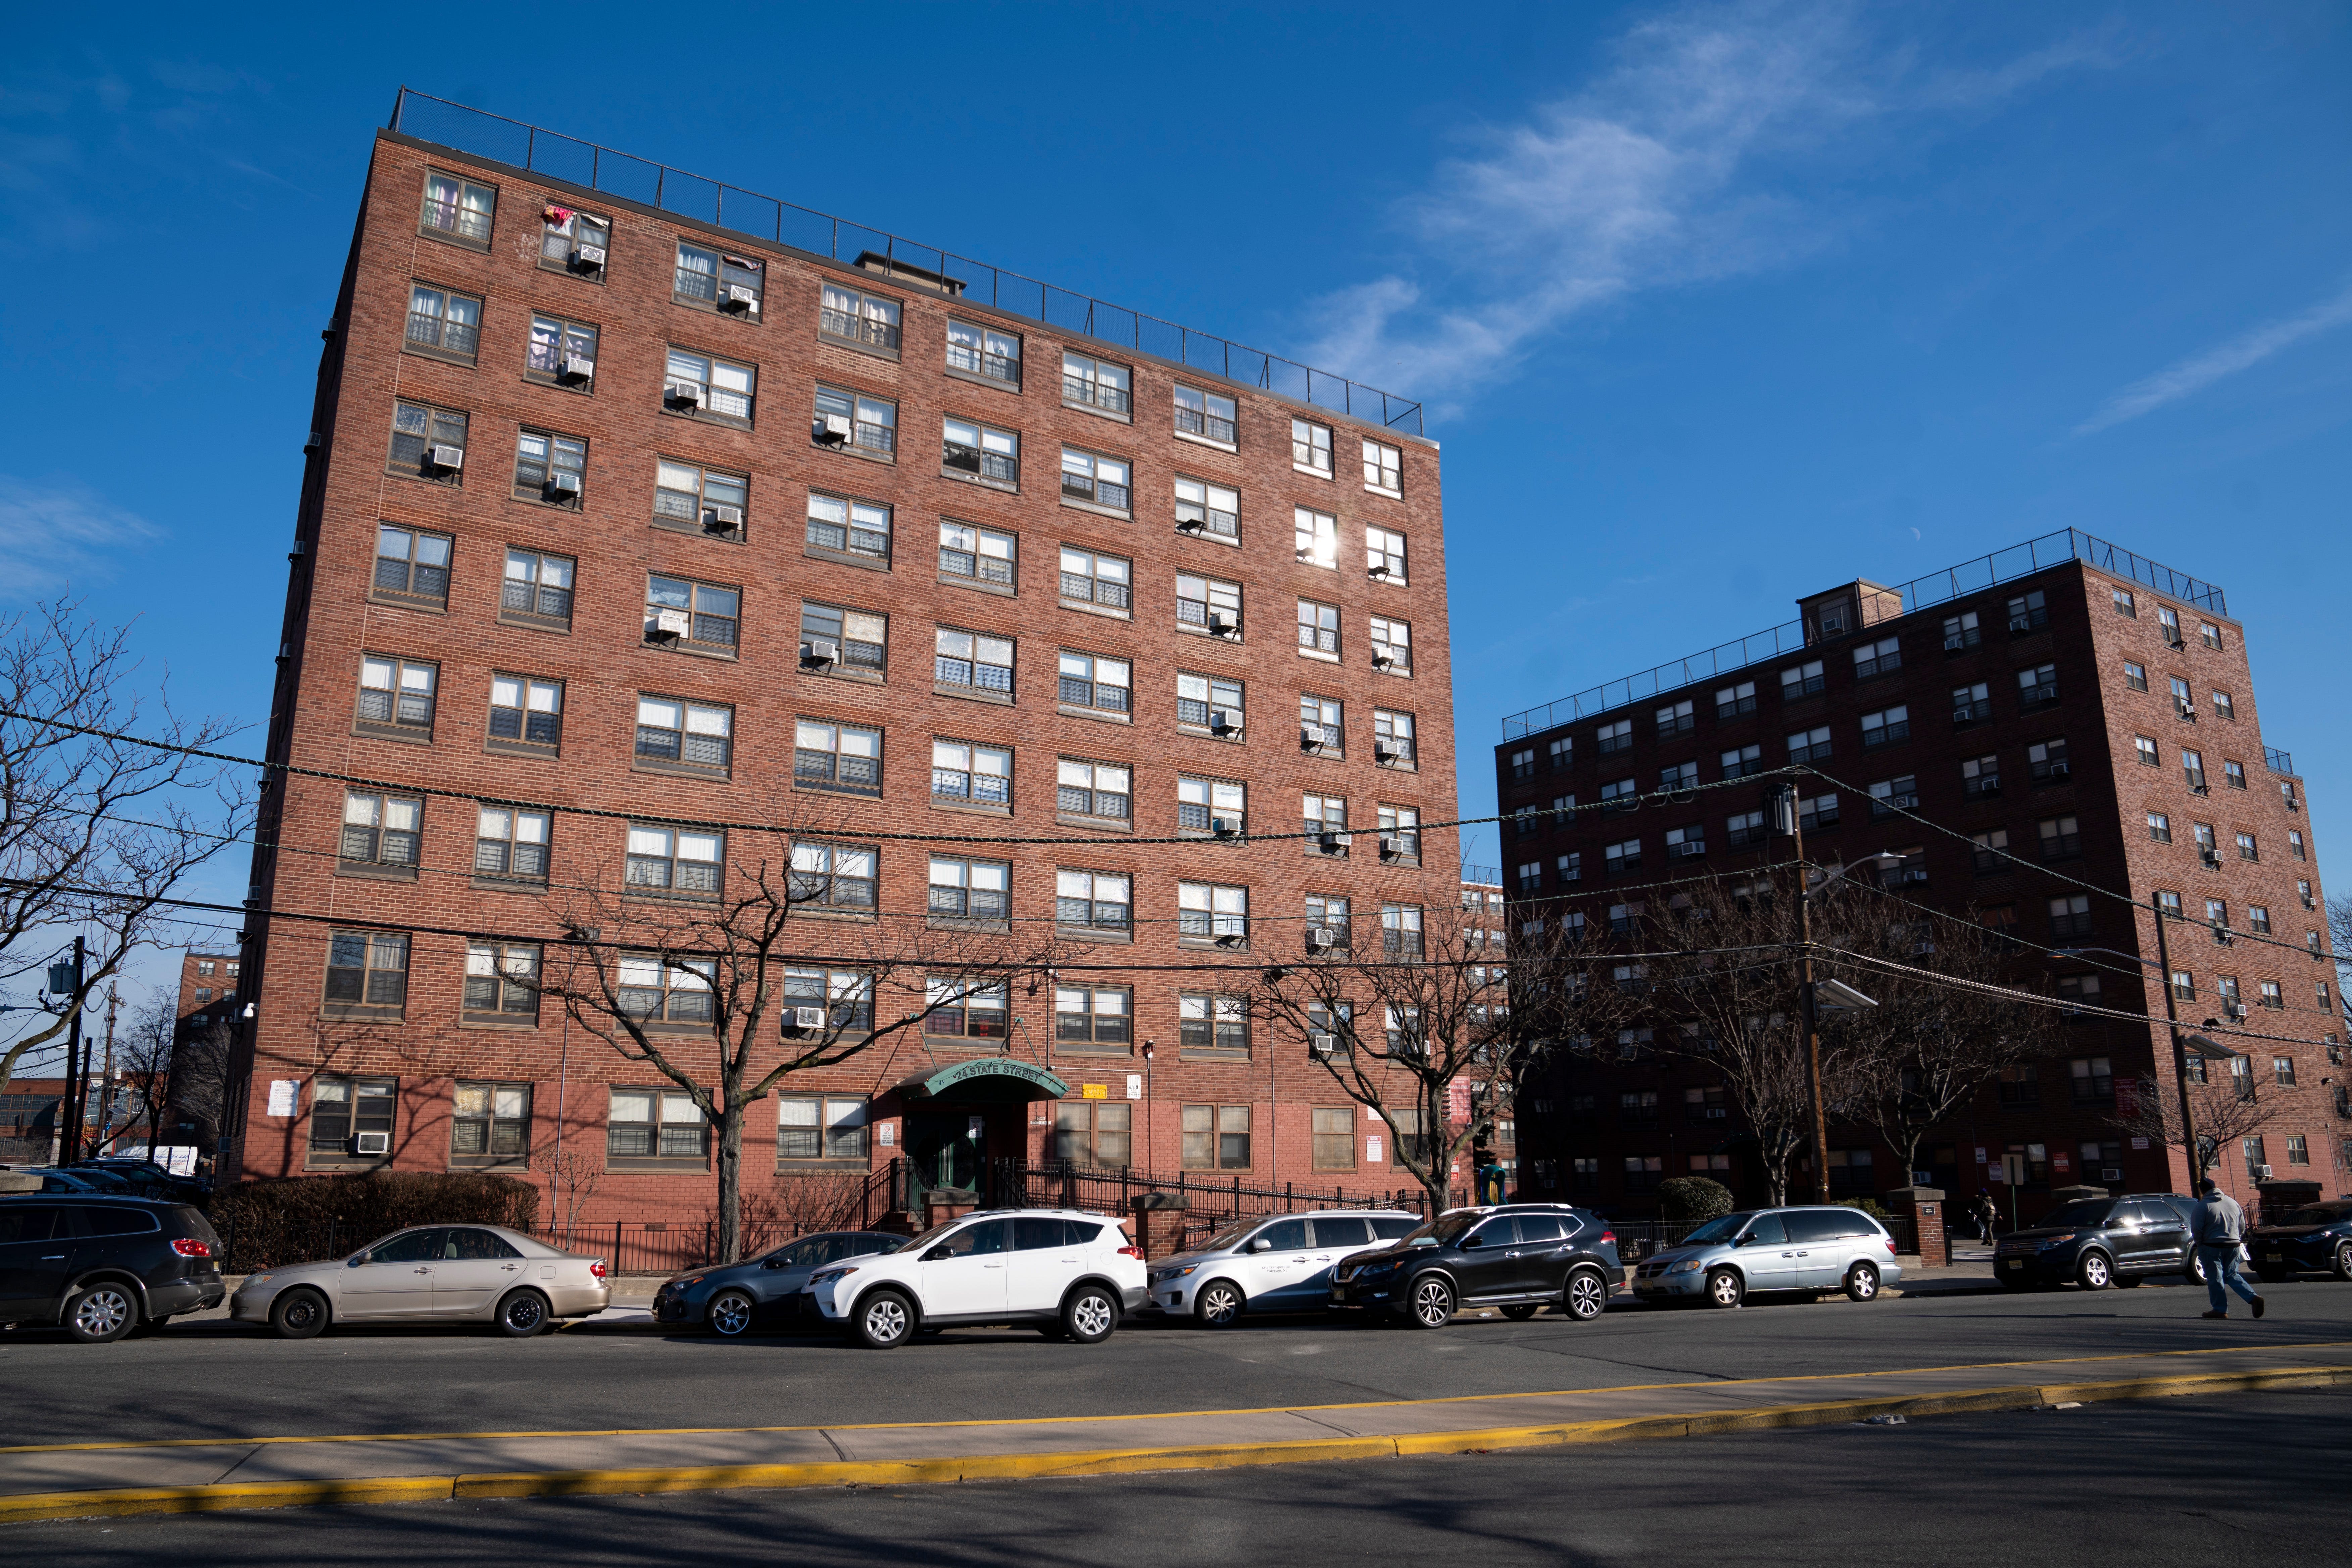 After power outage, Passaic apartment complex will be demolished. But that's not the end